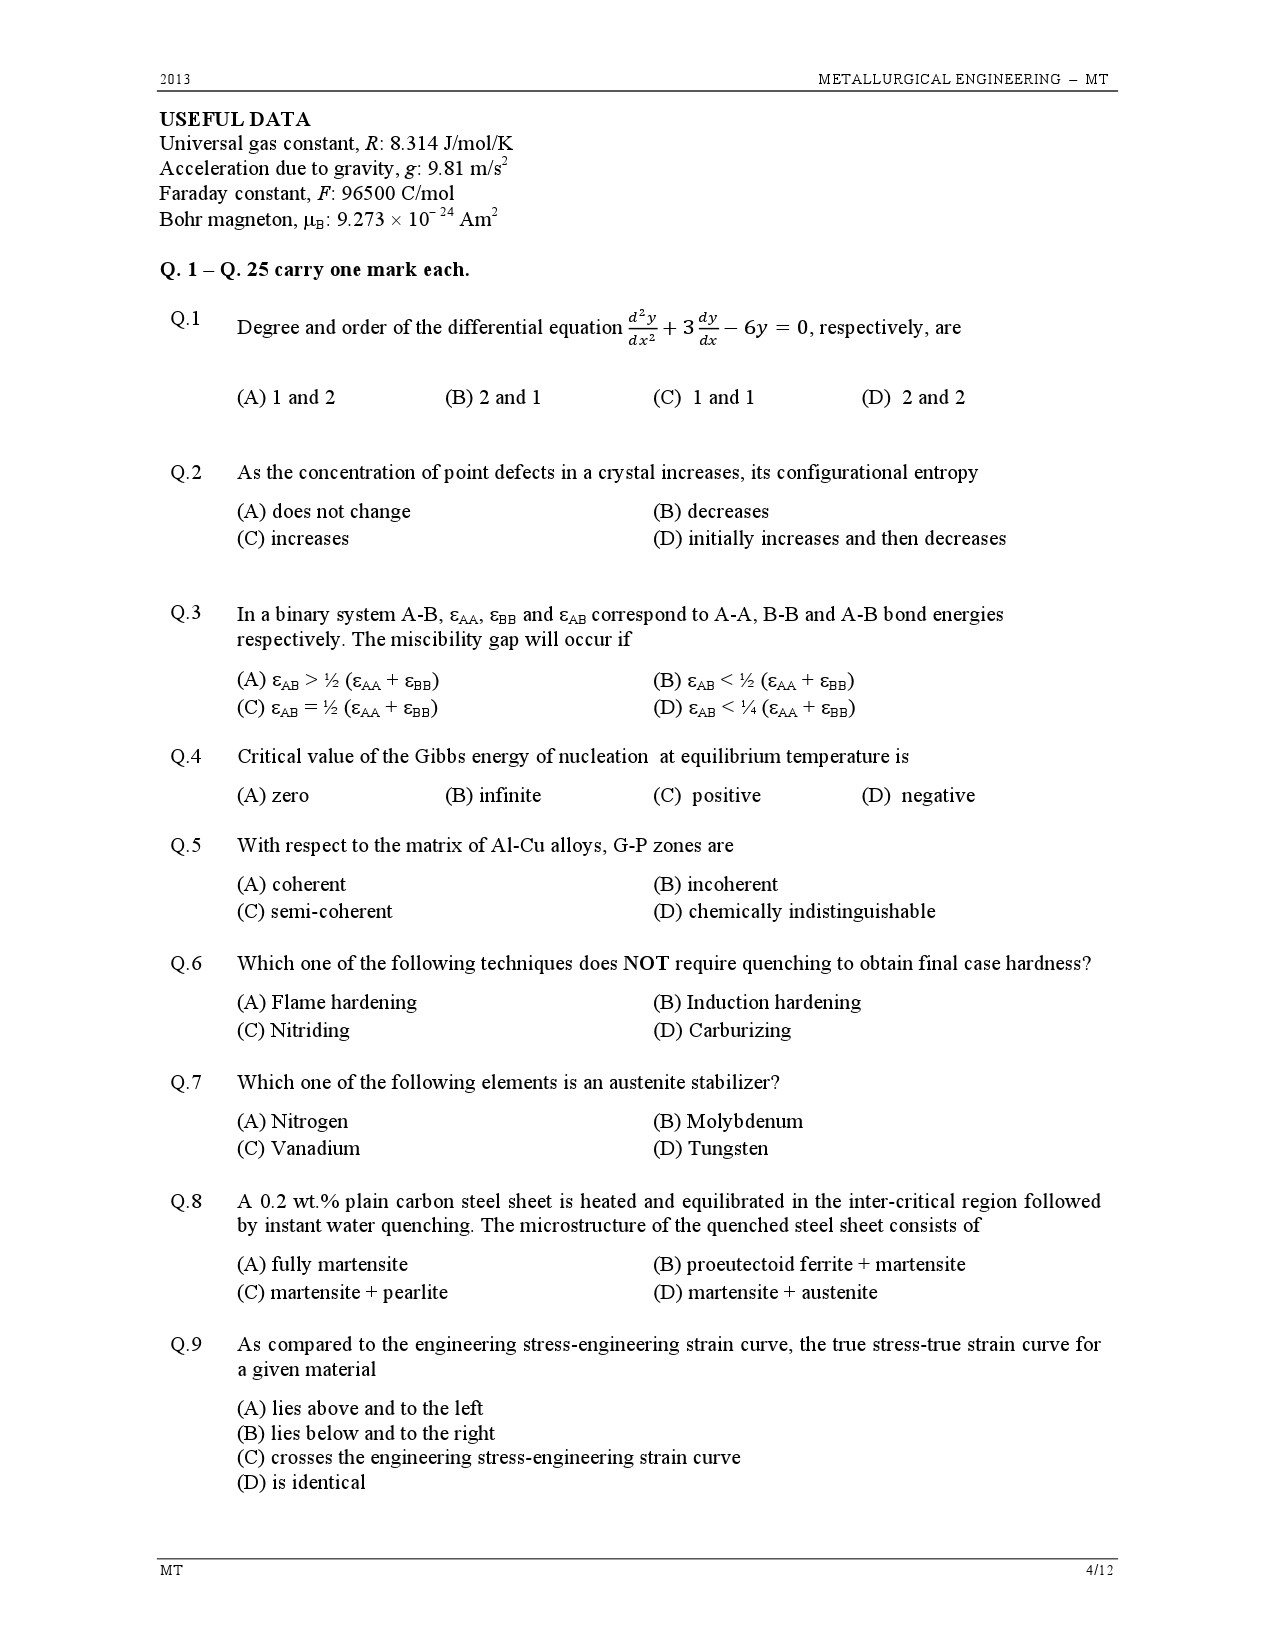 GATE Exam Question Paper 2013 Metallurgical Engineering 4